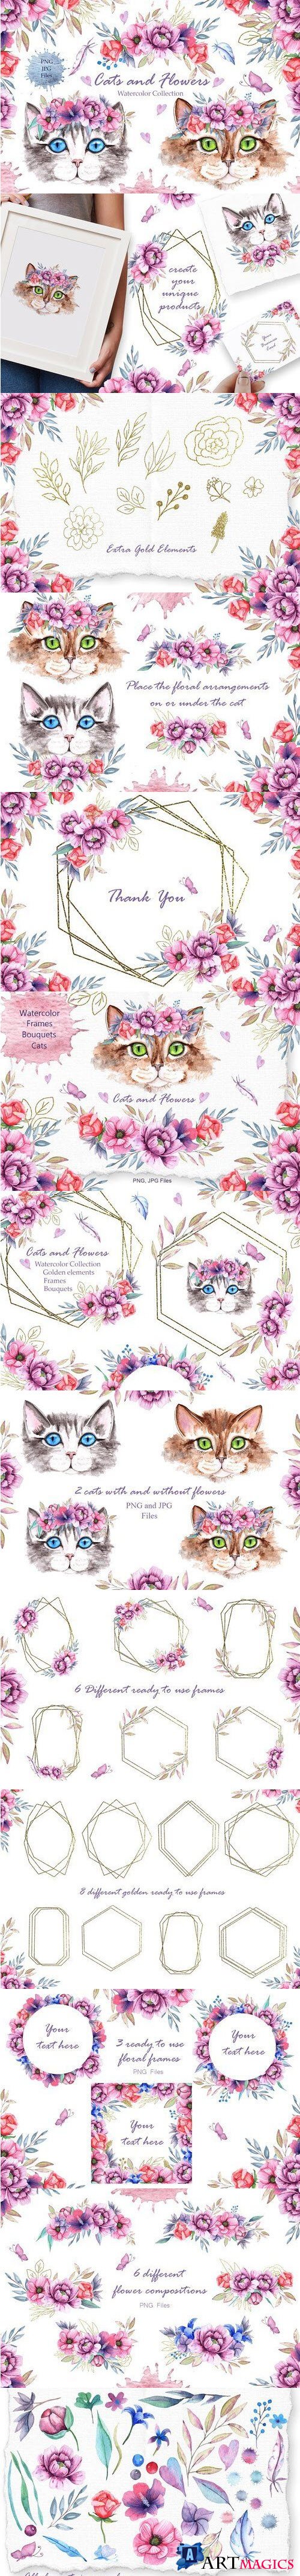 Watercolor Cats and Flowers - 4285663